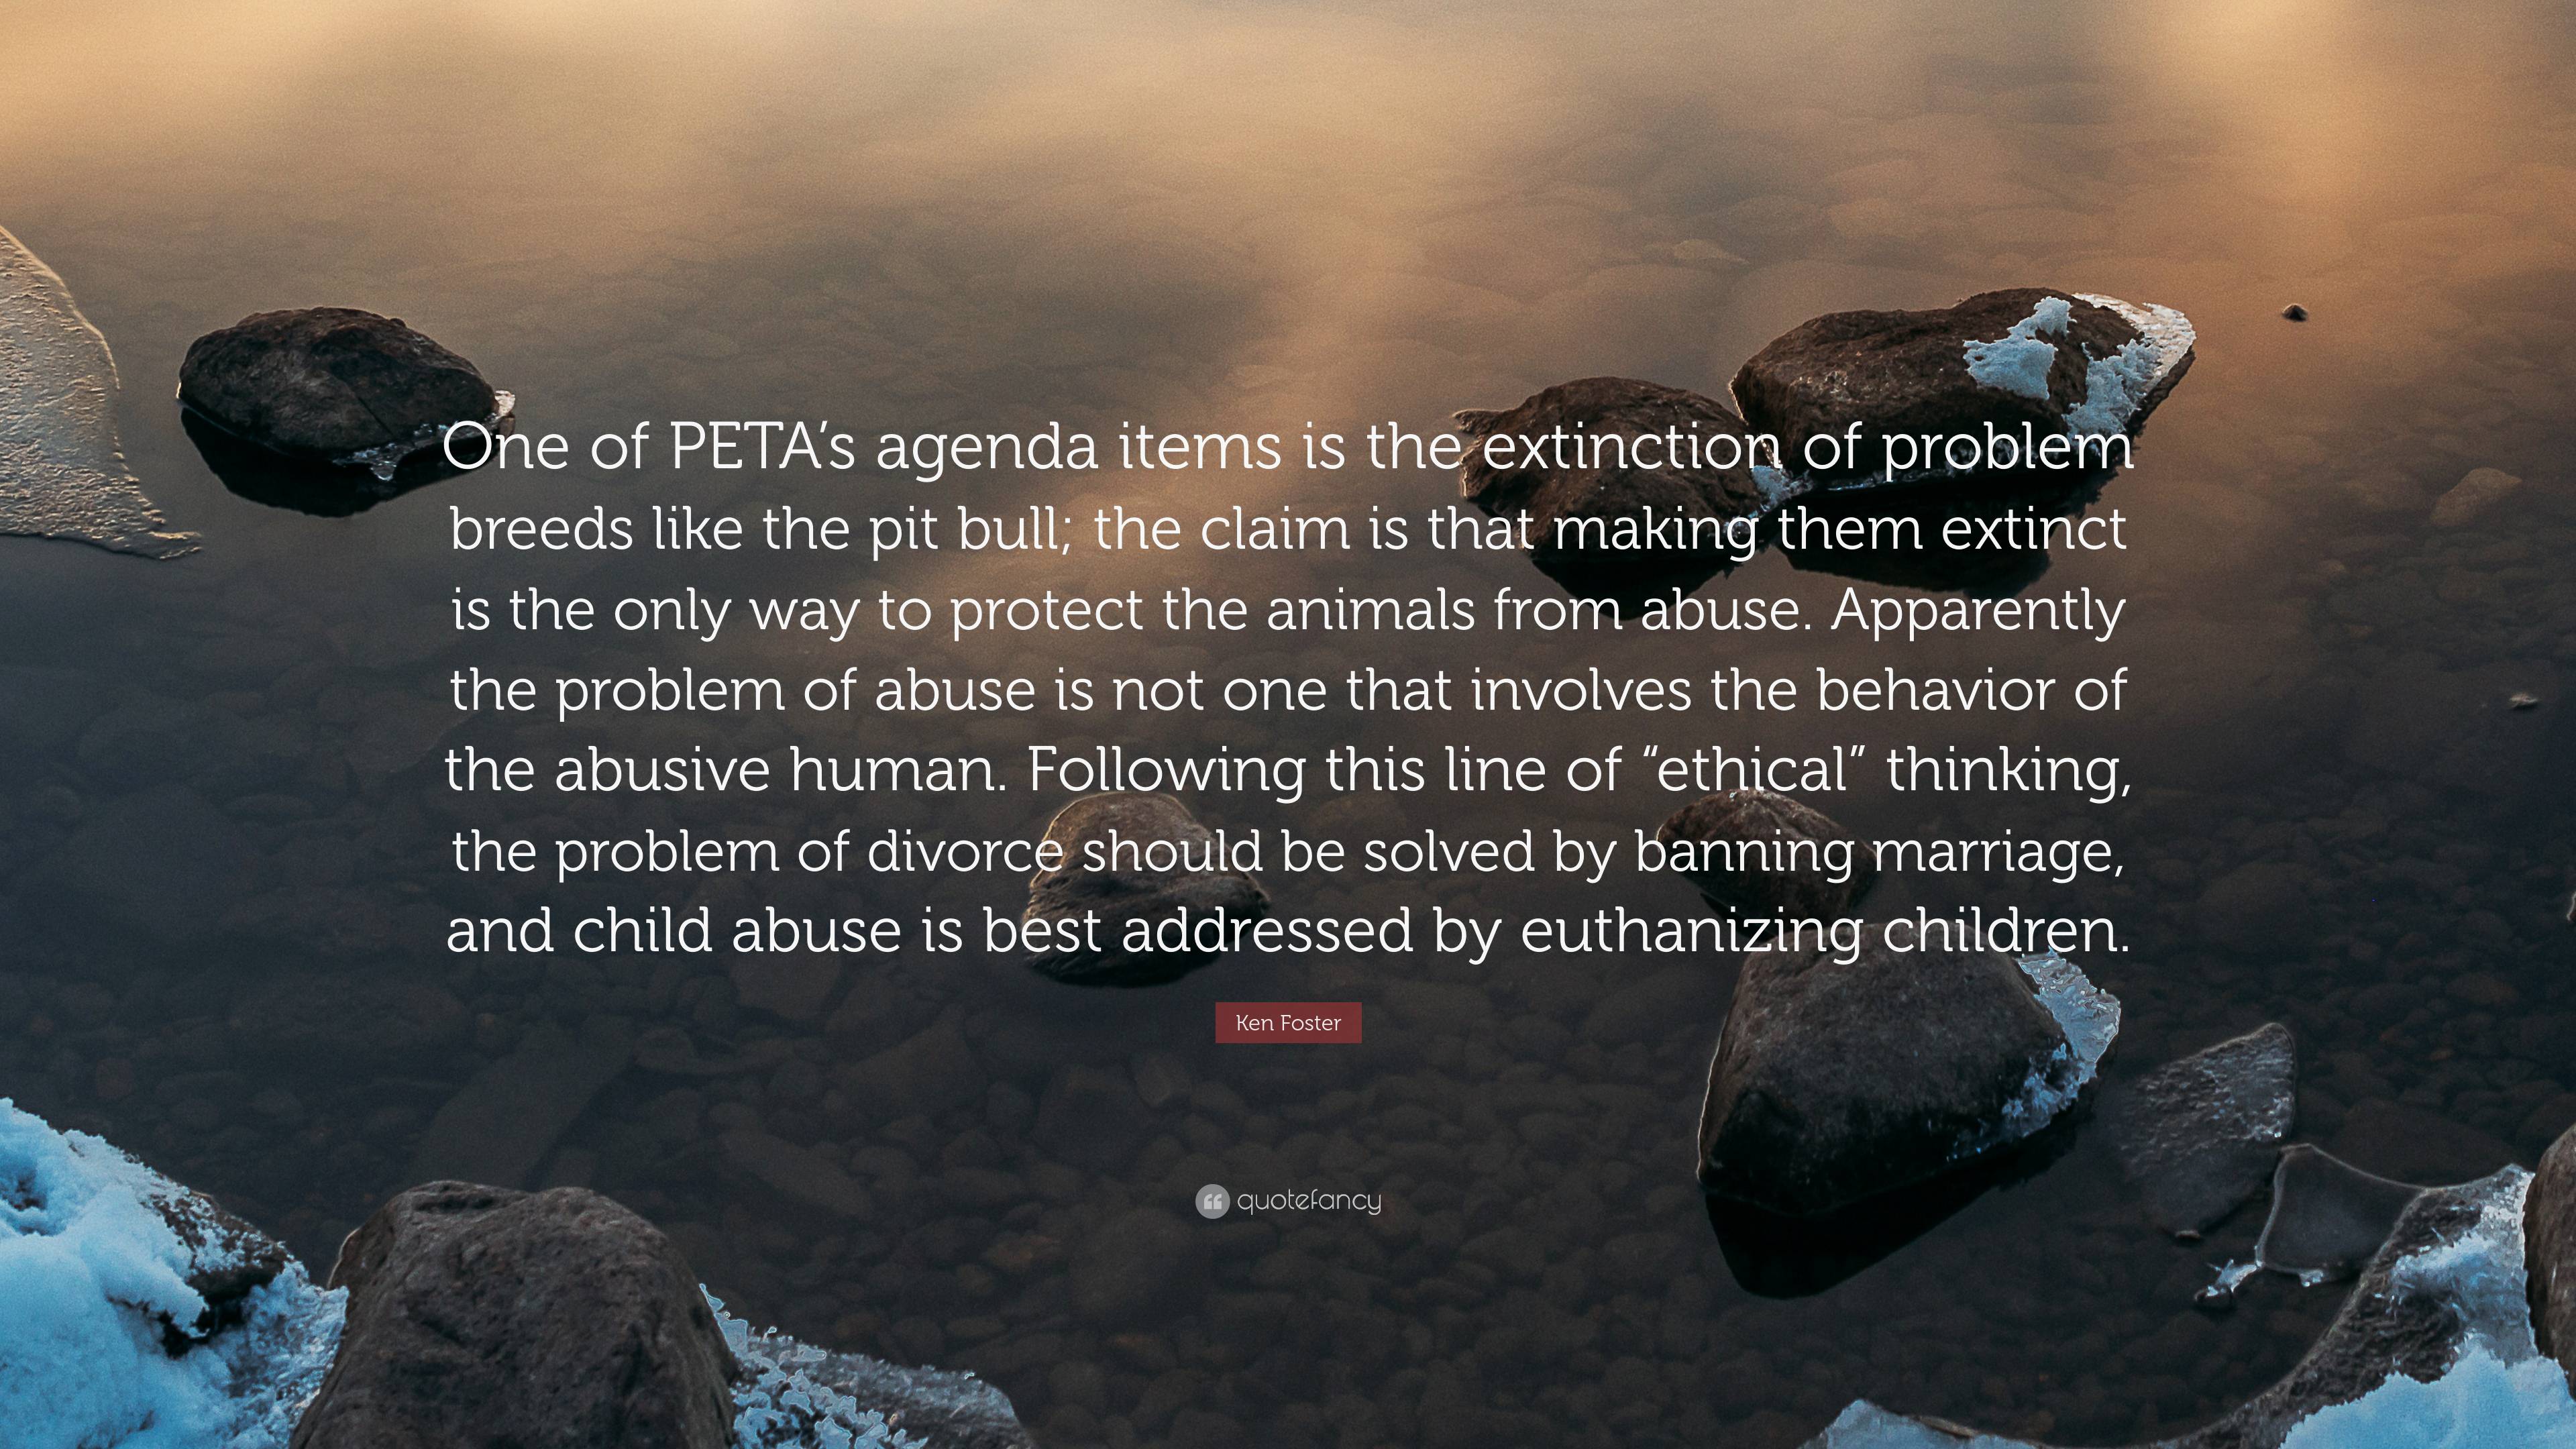 Ken Foster Quote: “One of PETA's agenda items is the extinction of problem  breeds like the pit bull; the claim is that making them extinct ...”